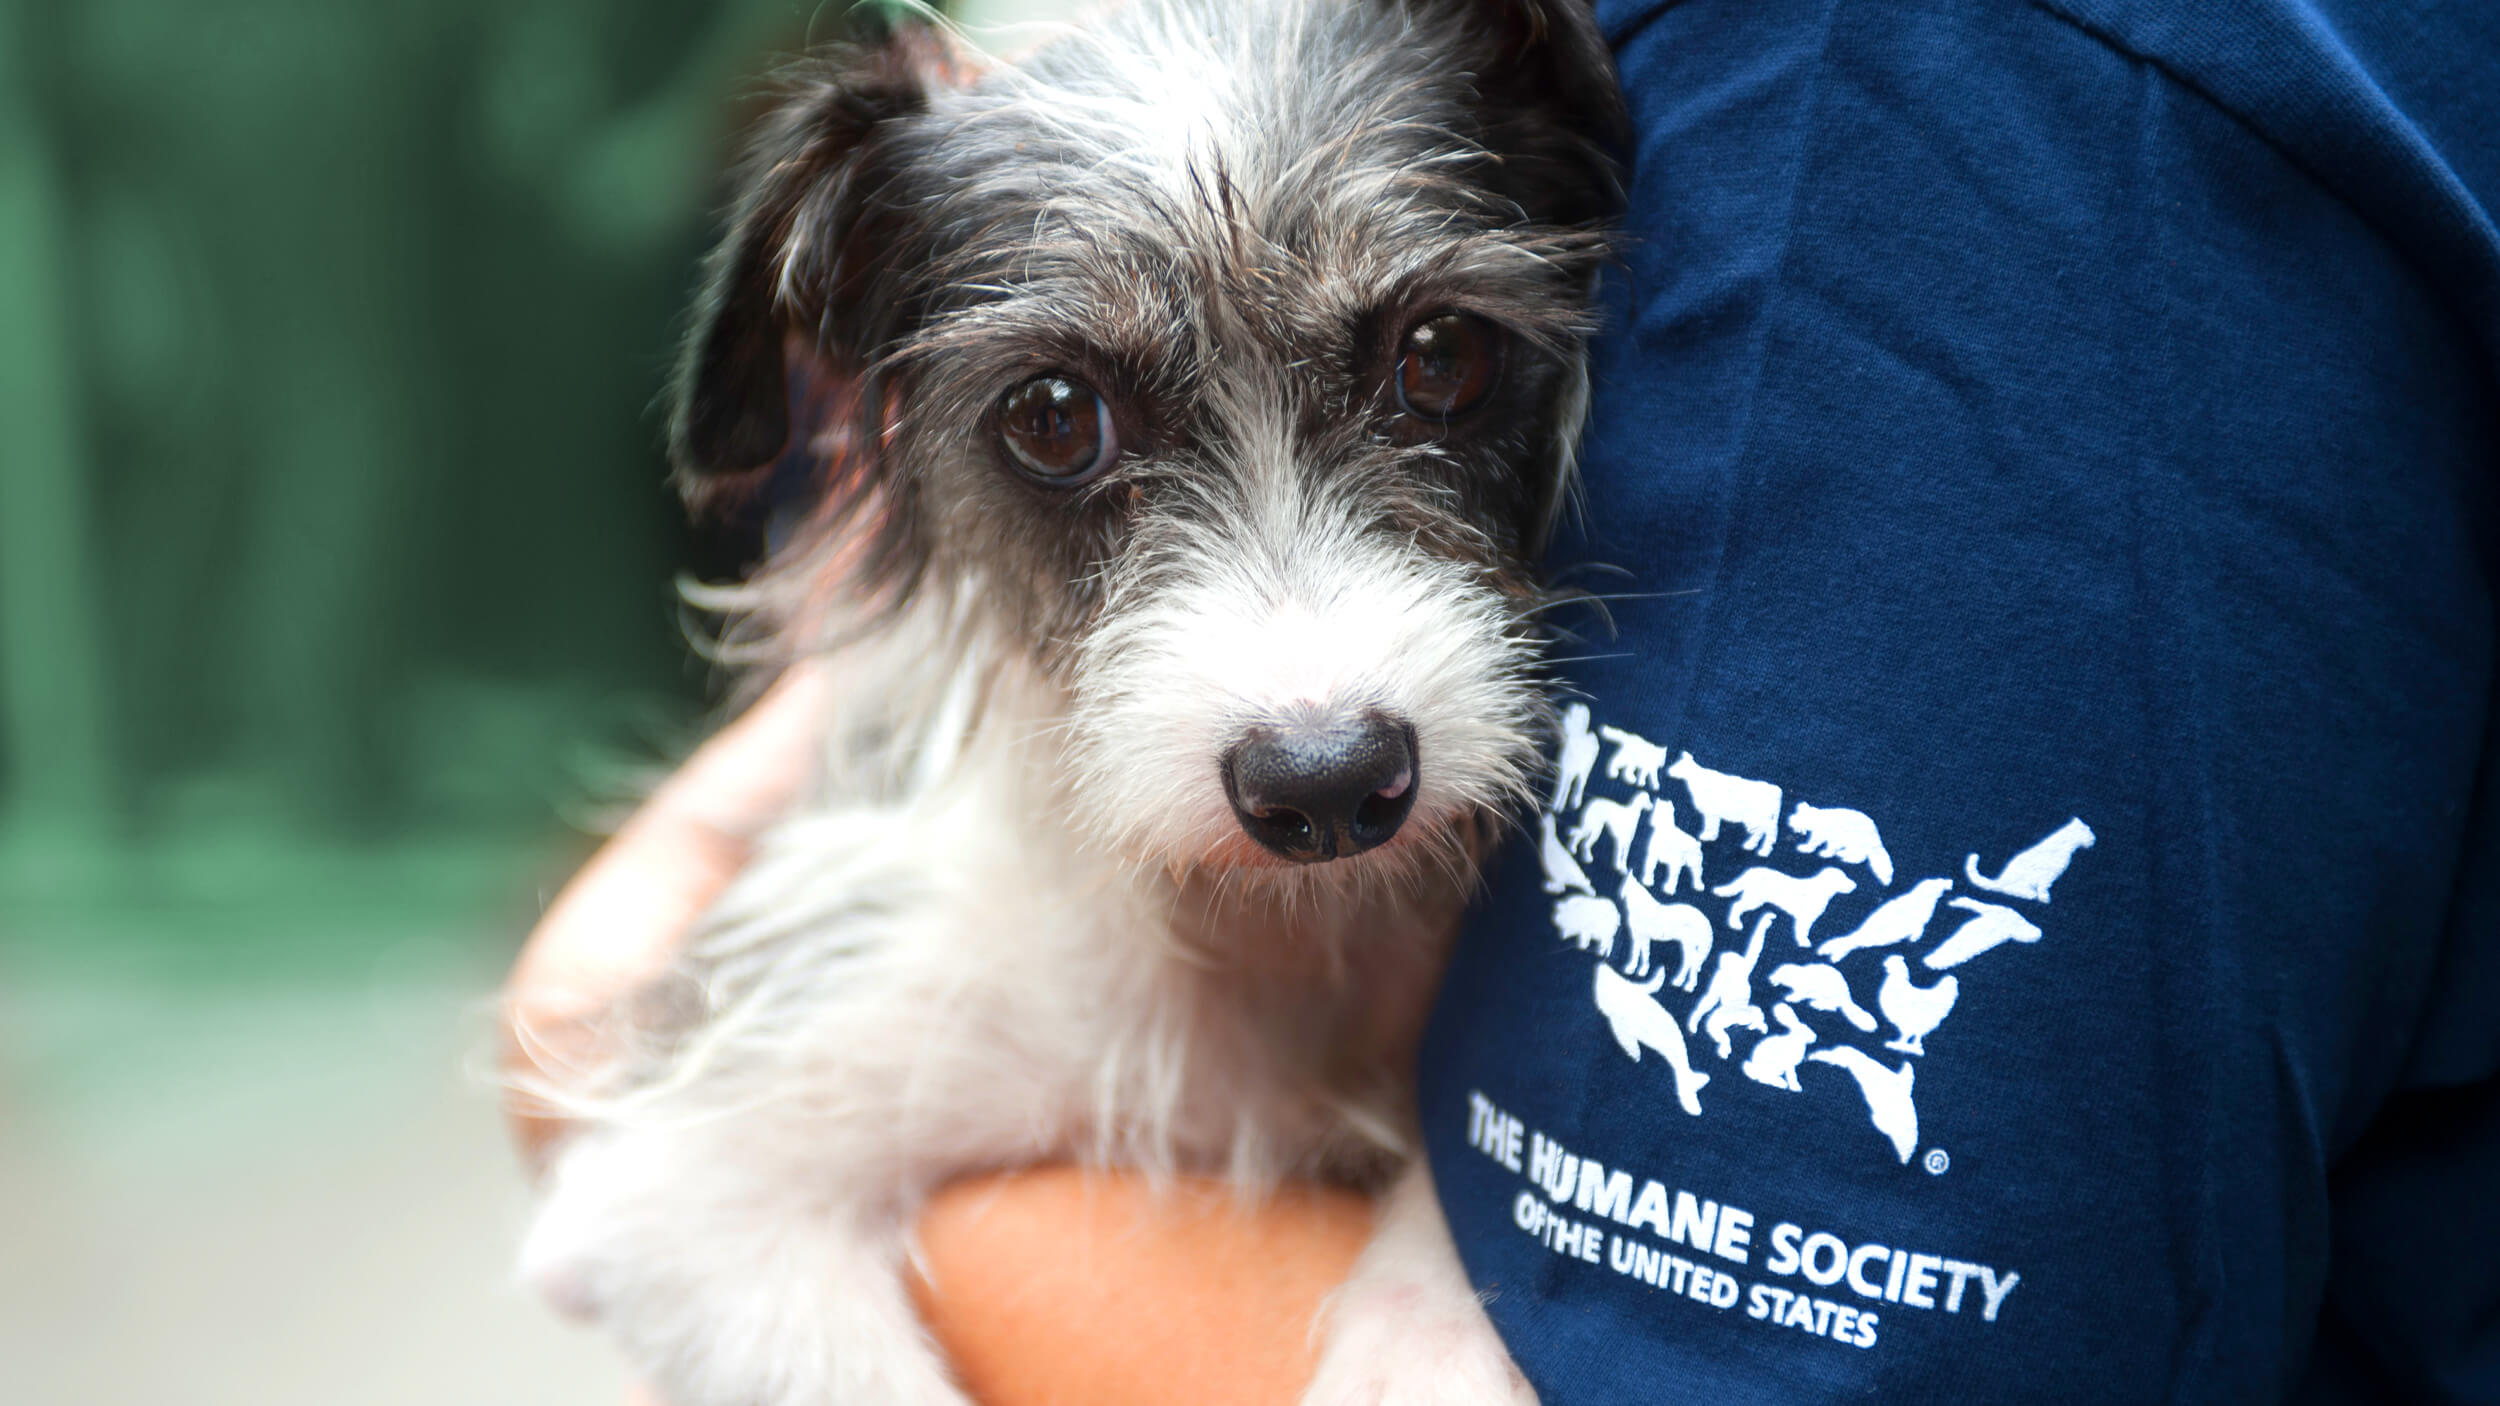 The Humane Society of the United States